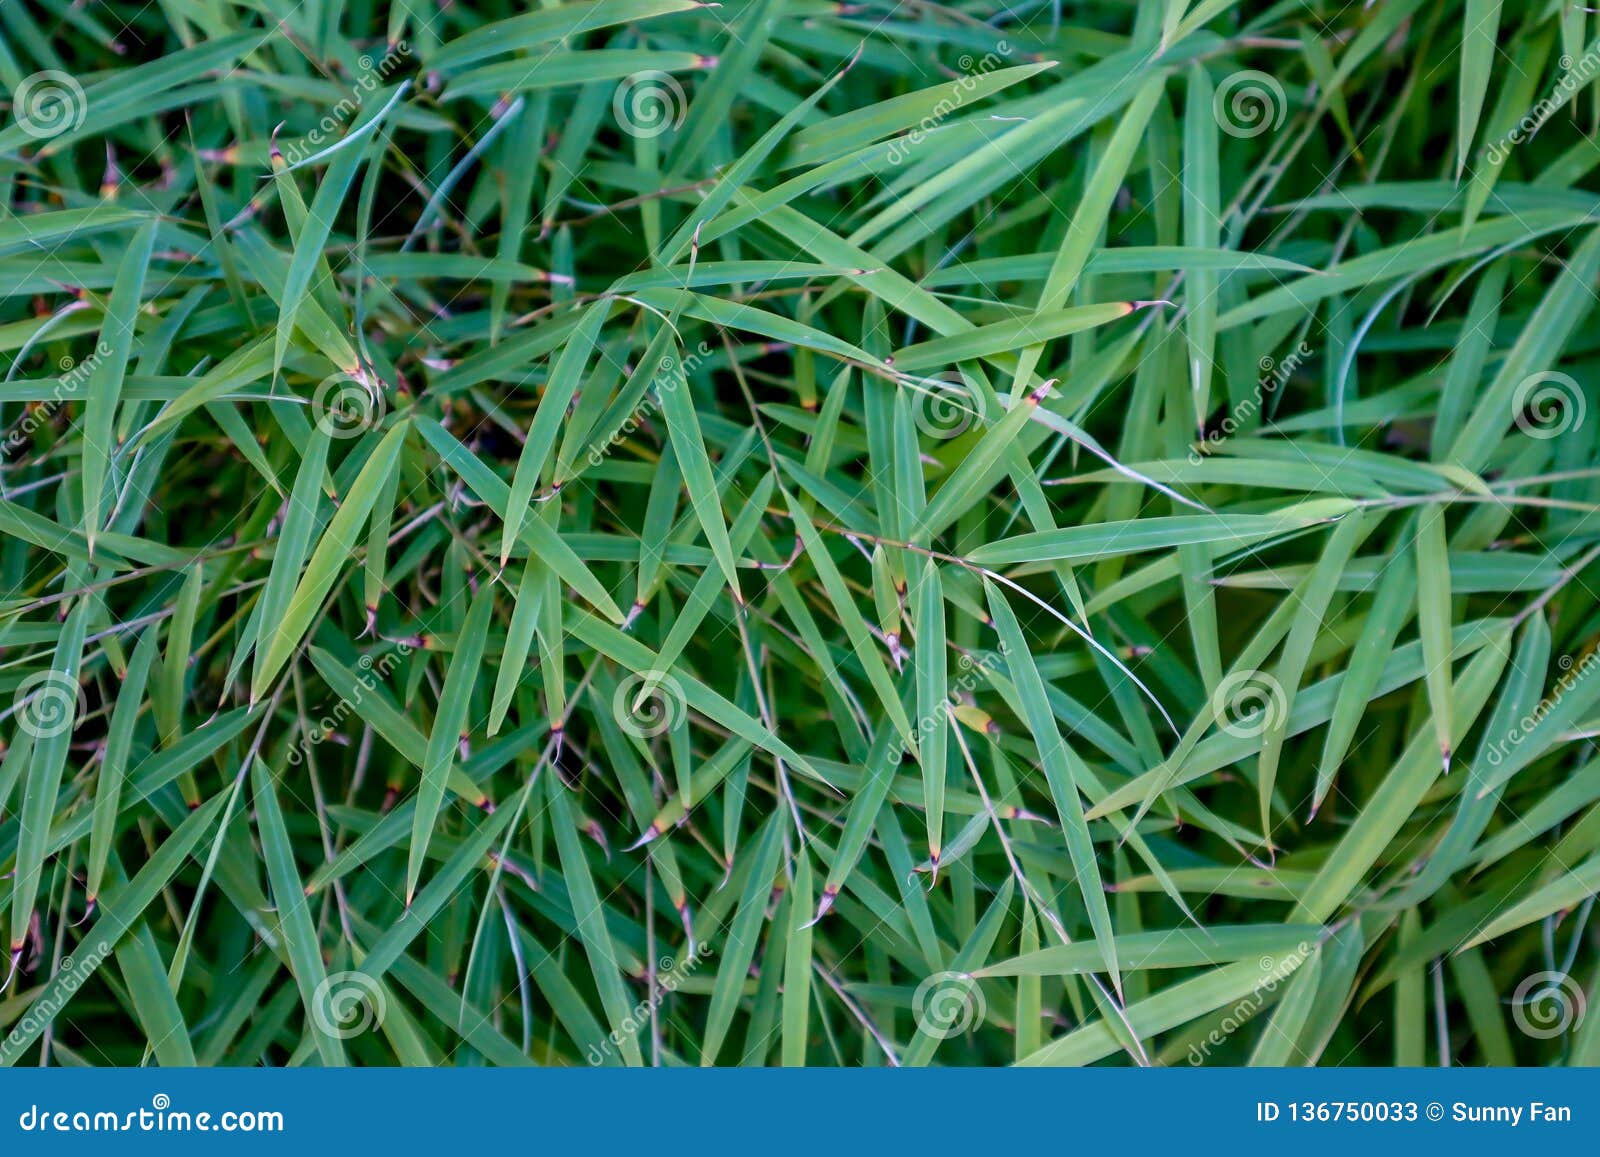 young green bamboo leaves cover